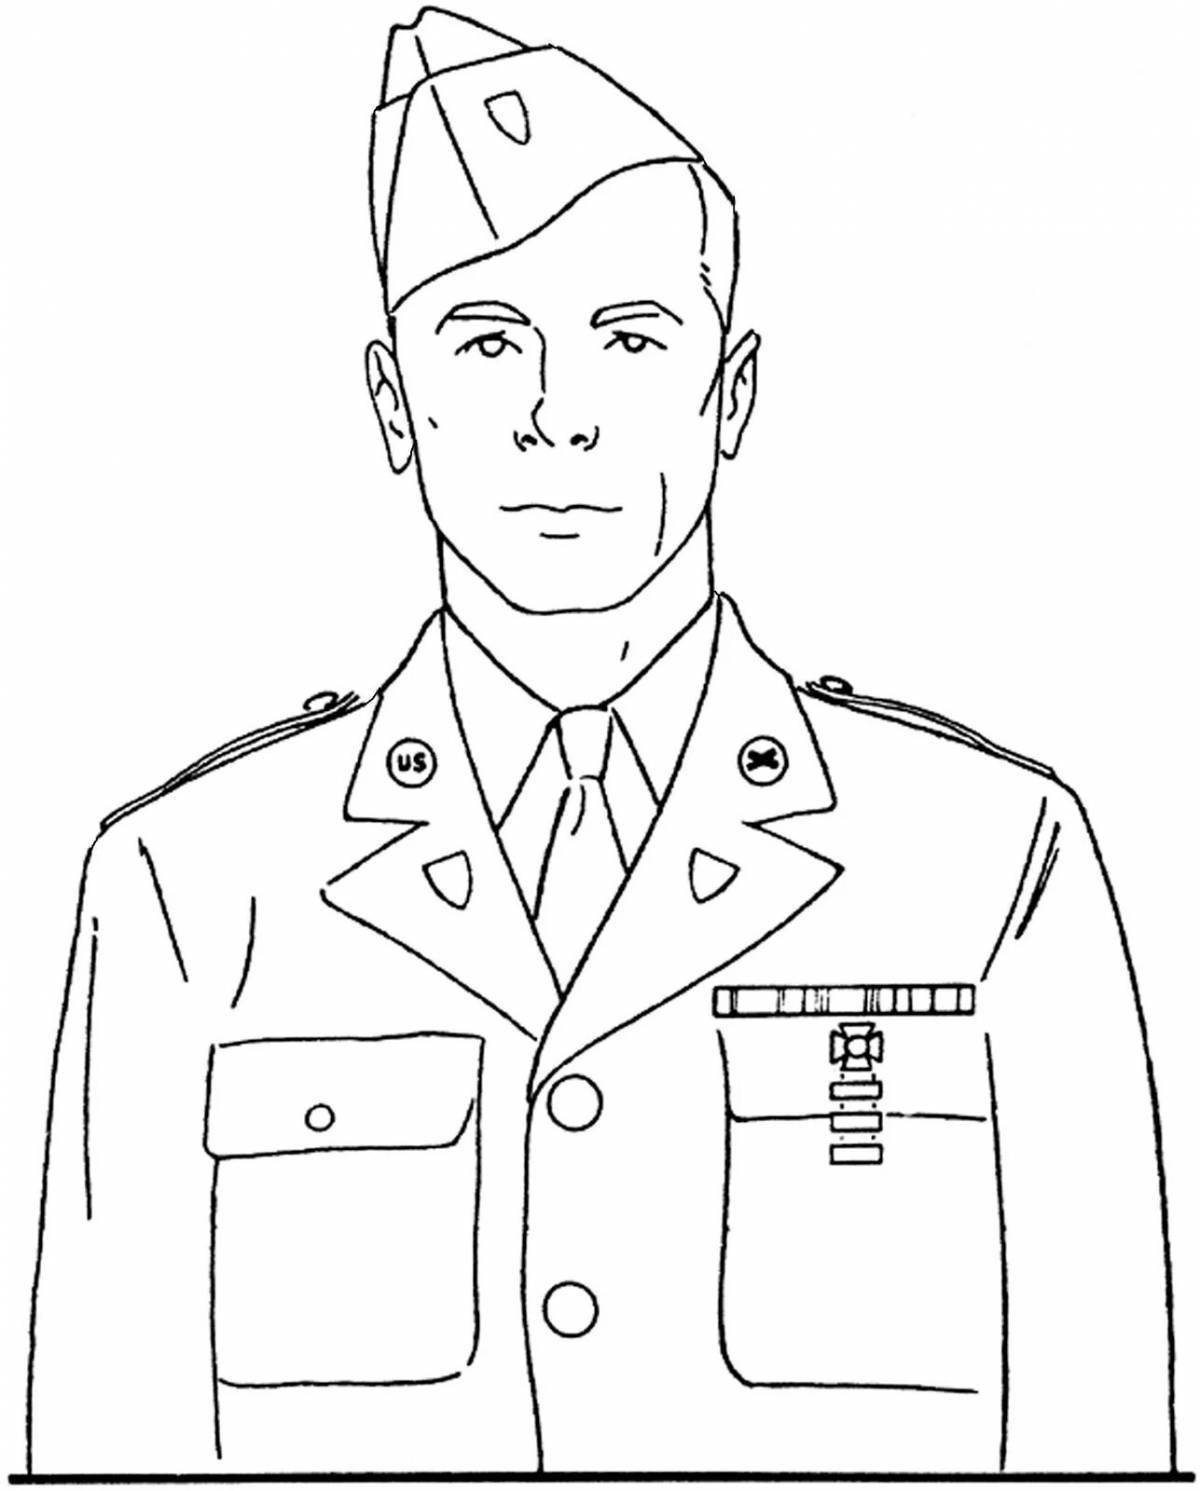 Great fighting face coloring page